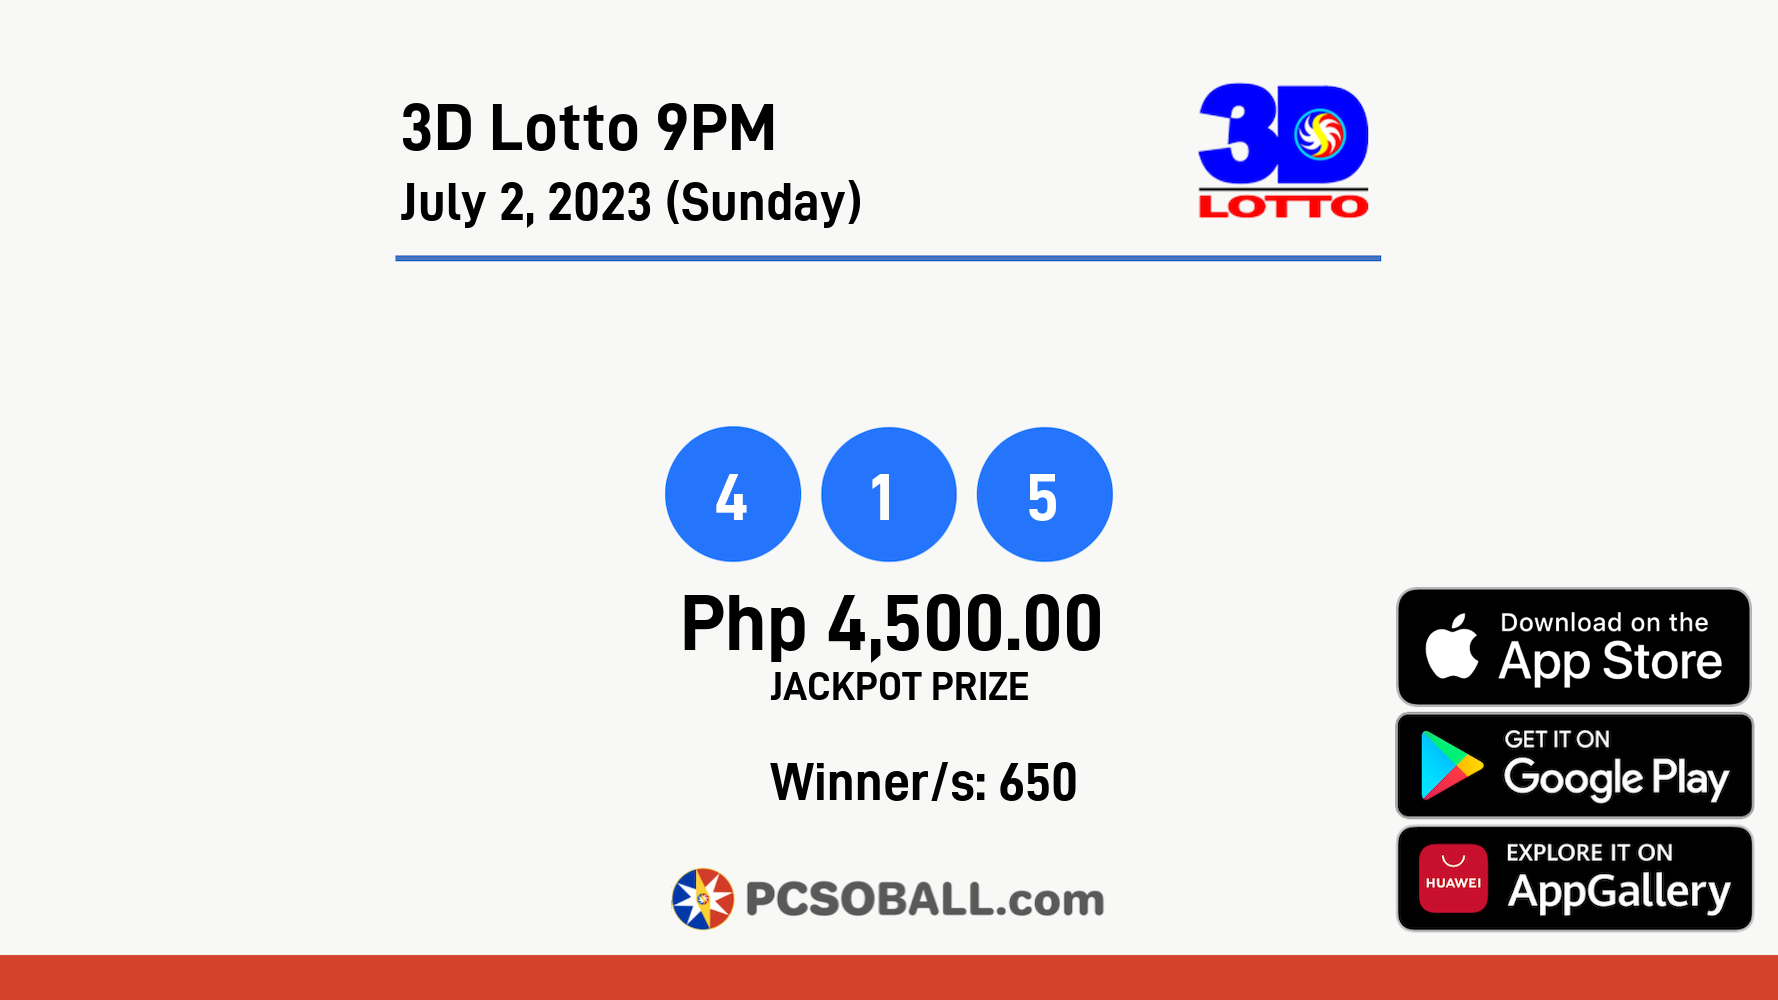 3D Lotto 9PM July 2, 2023 (Sunday) Result